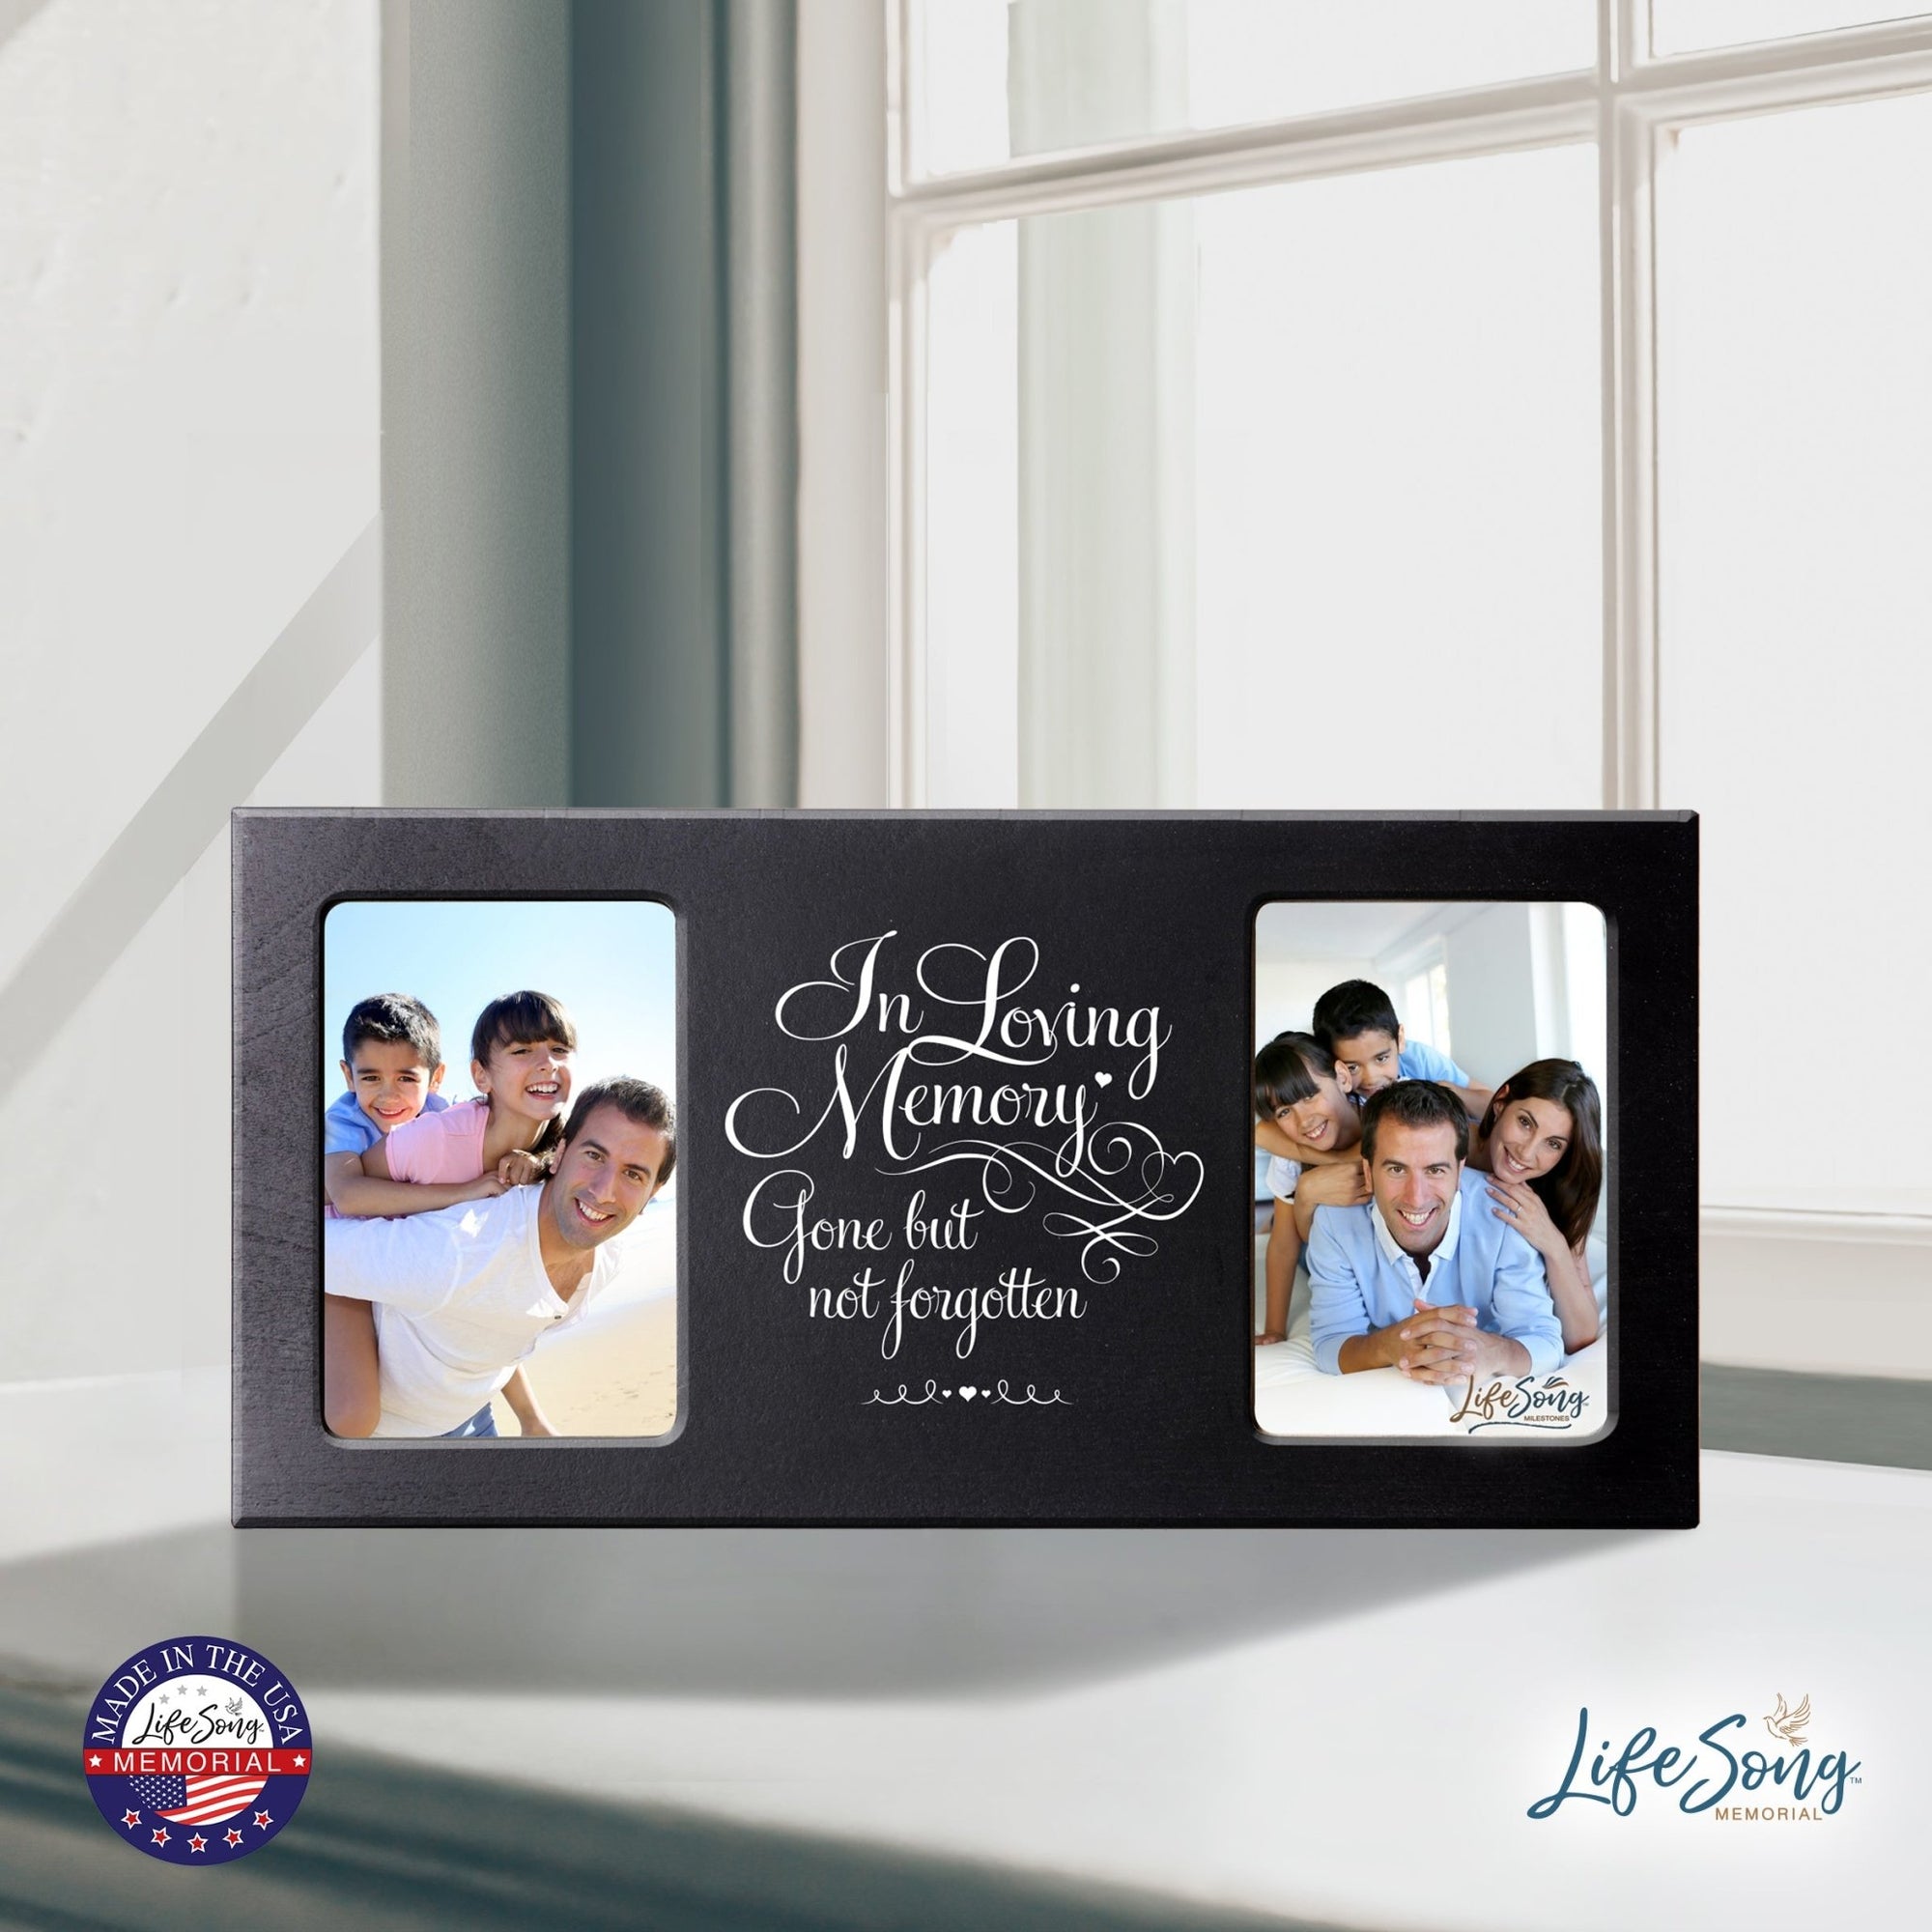 Engraved Friends Everyday White 4x6 Picture Frame- Vertical/Portrait